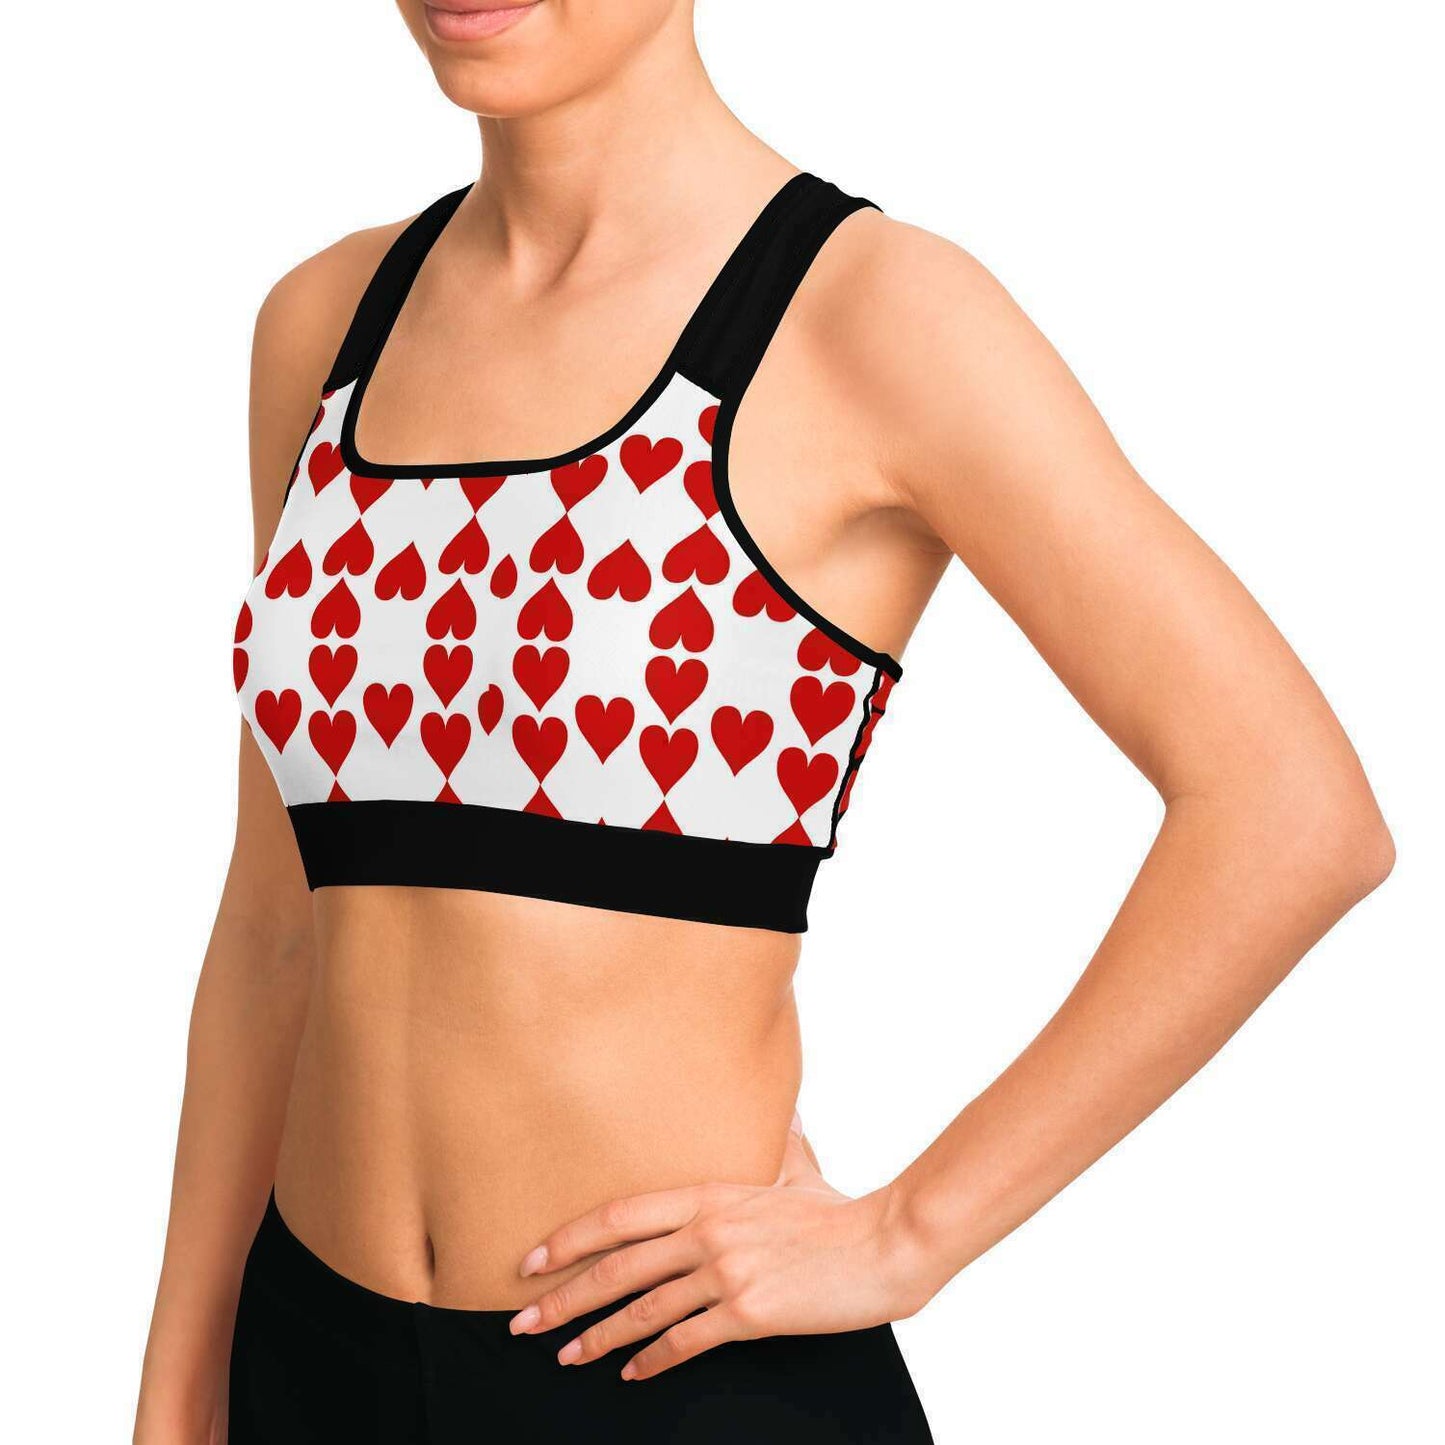 Queen of Hearts Black and White Sports Bra – Wired Cat